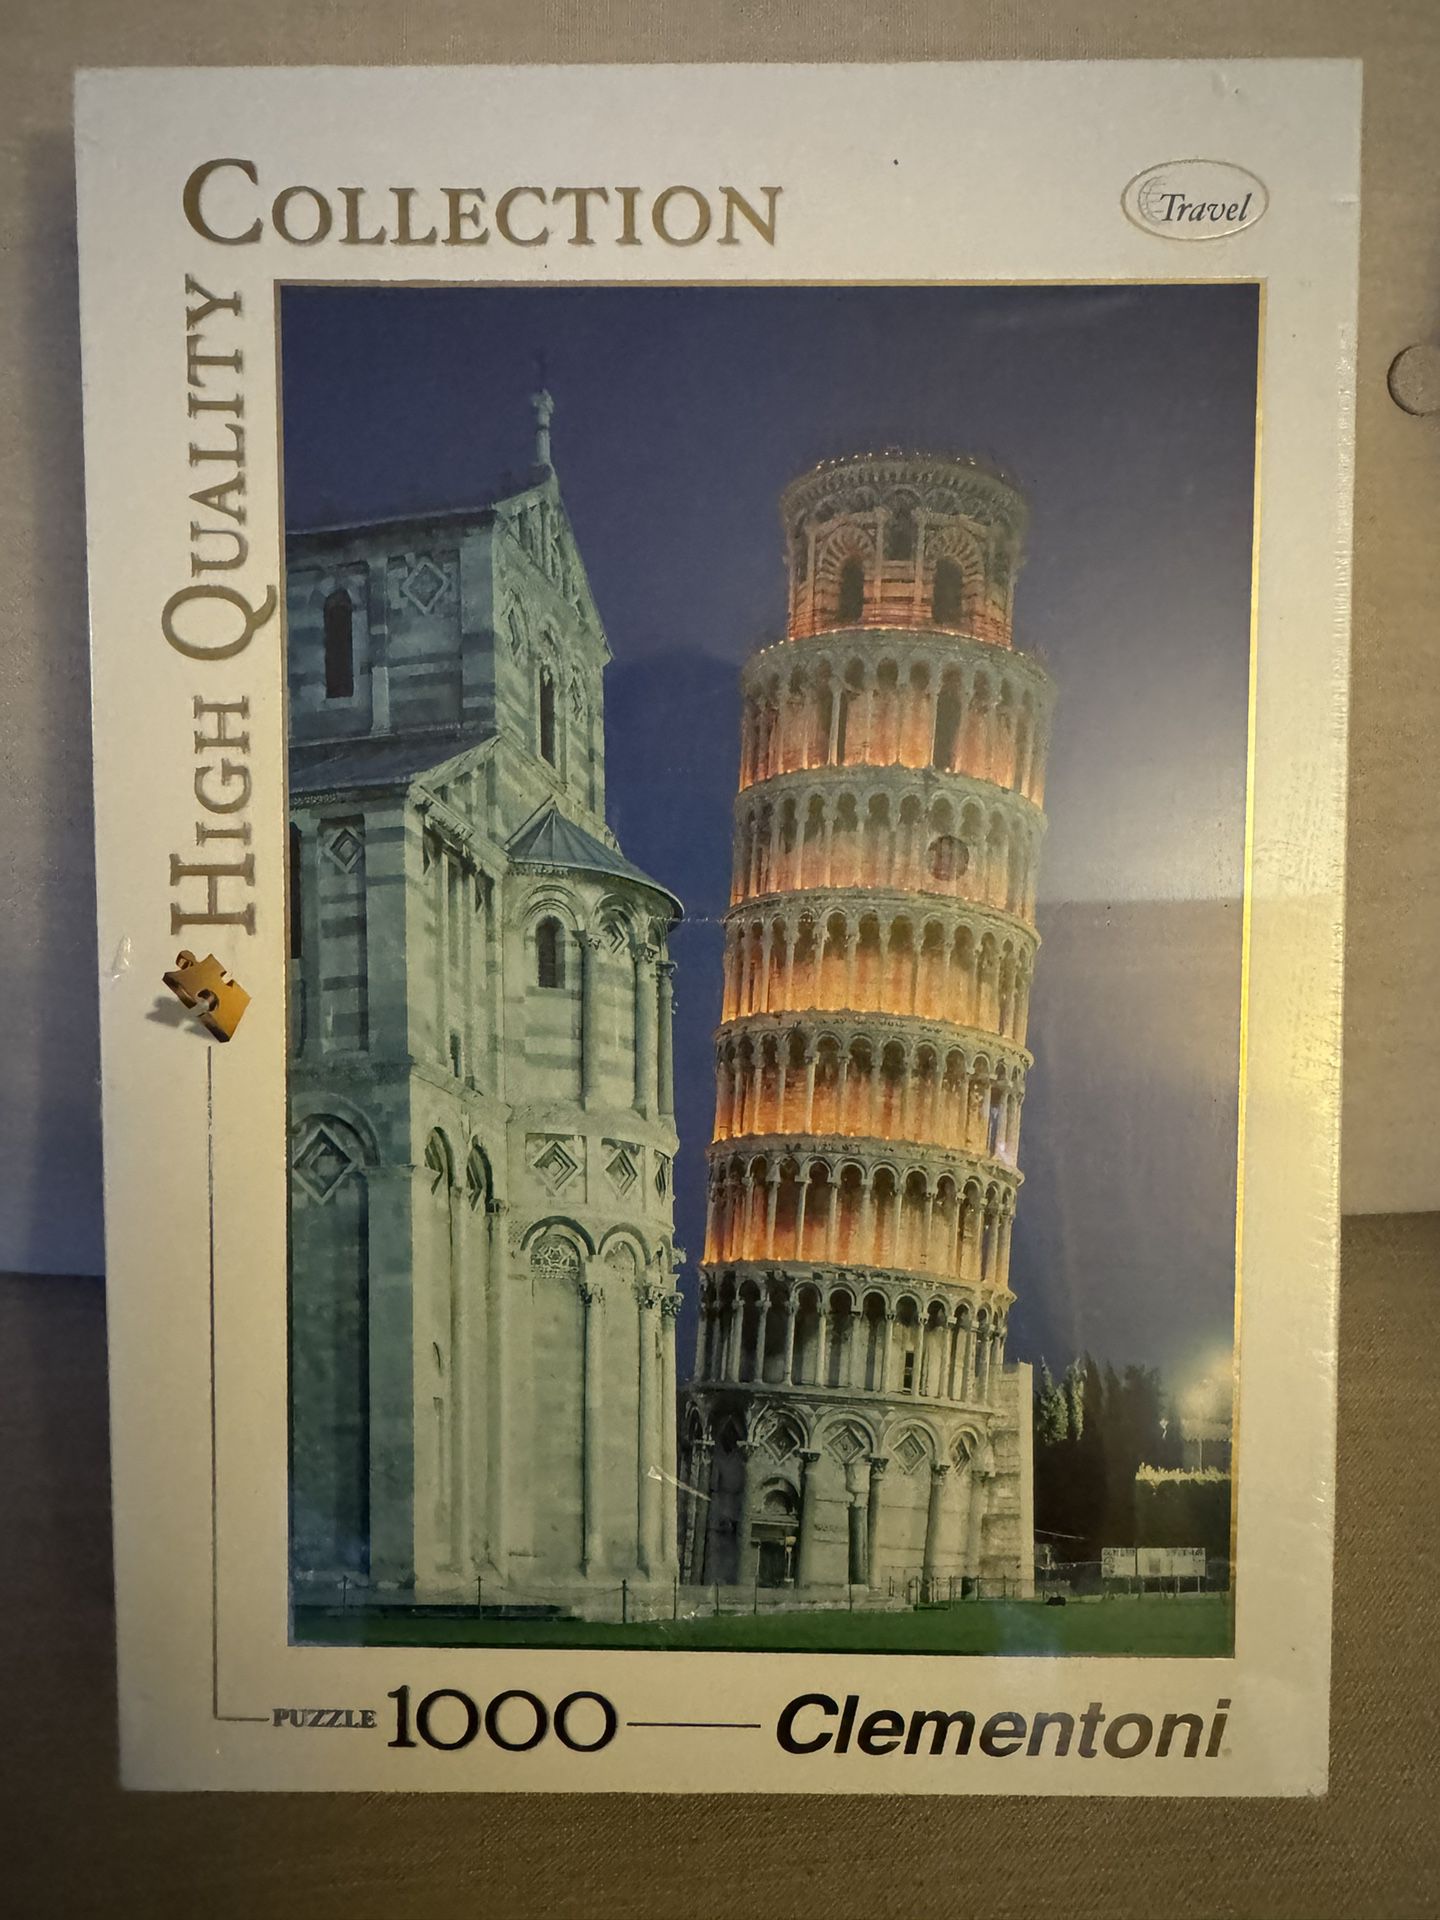 NEW Leaning Tower of Pisa - 1000pc Jigsaw Puzzle by Clementoni Art. 31485